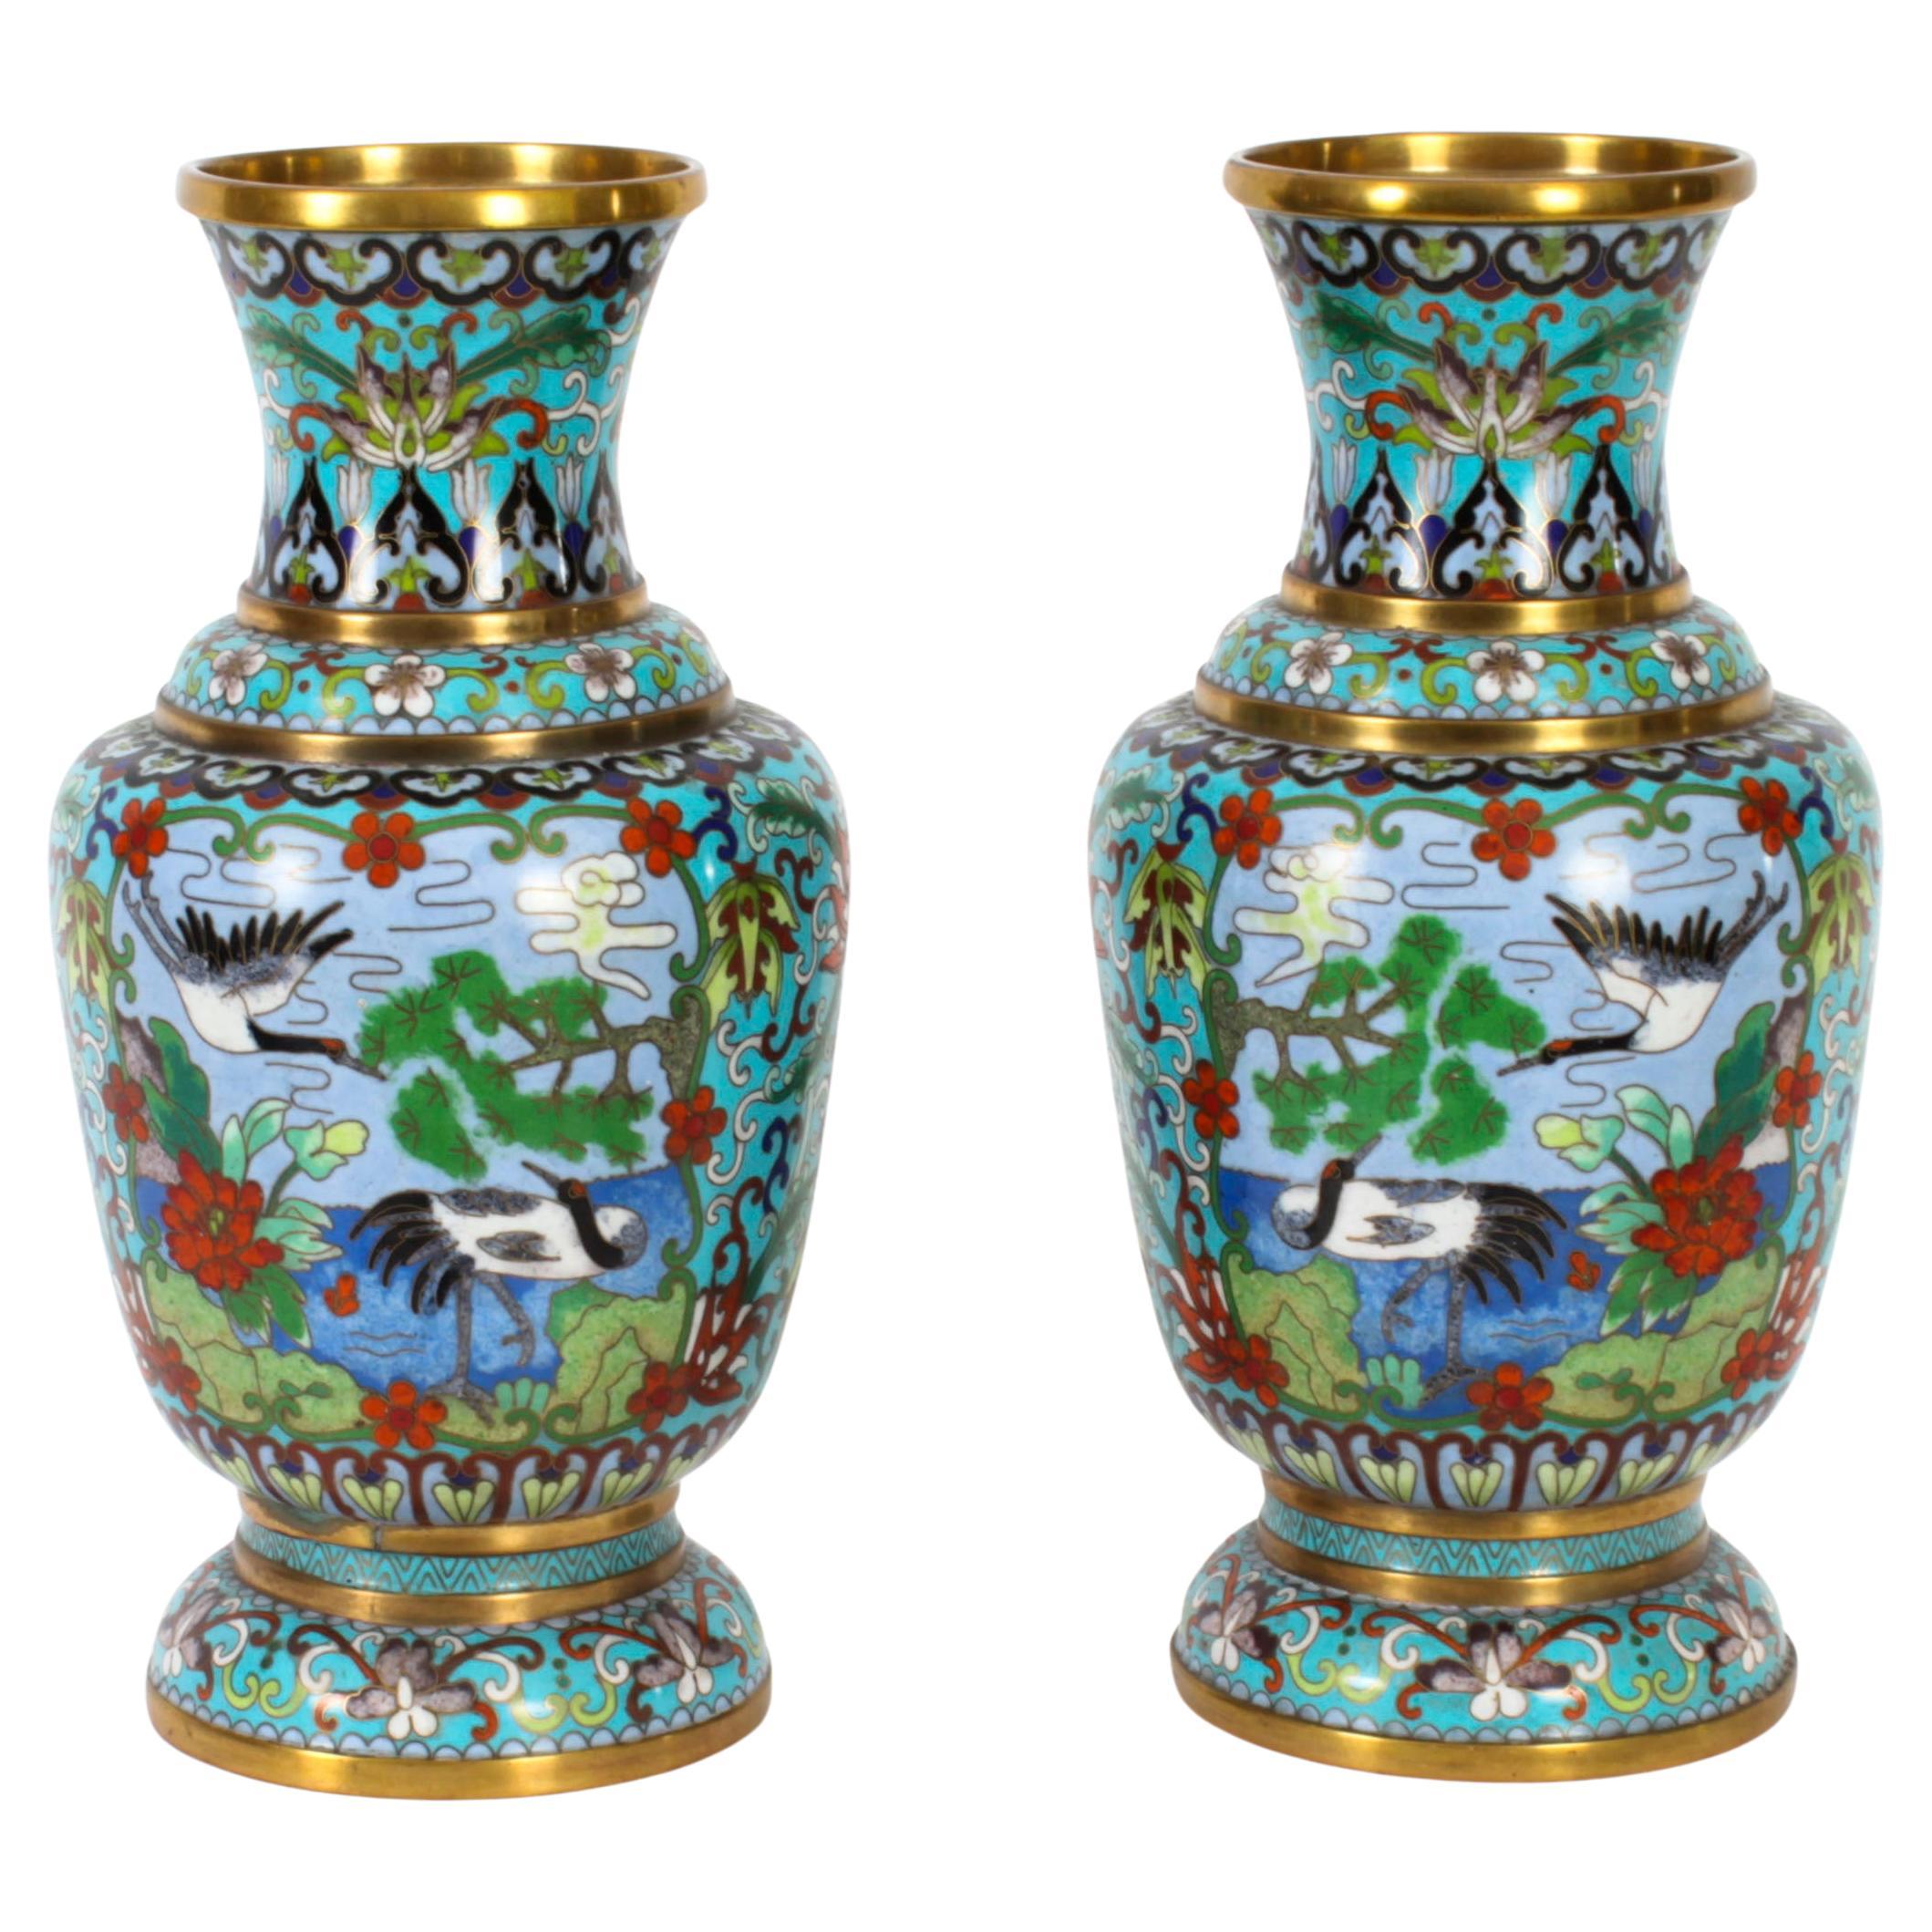 Vintage Pair of Chinese Cloisonné Enamelled Vases 20th C For Sale